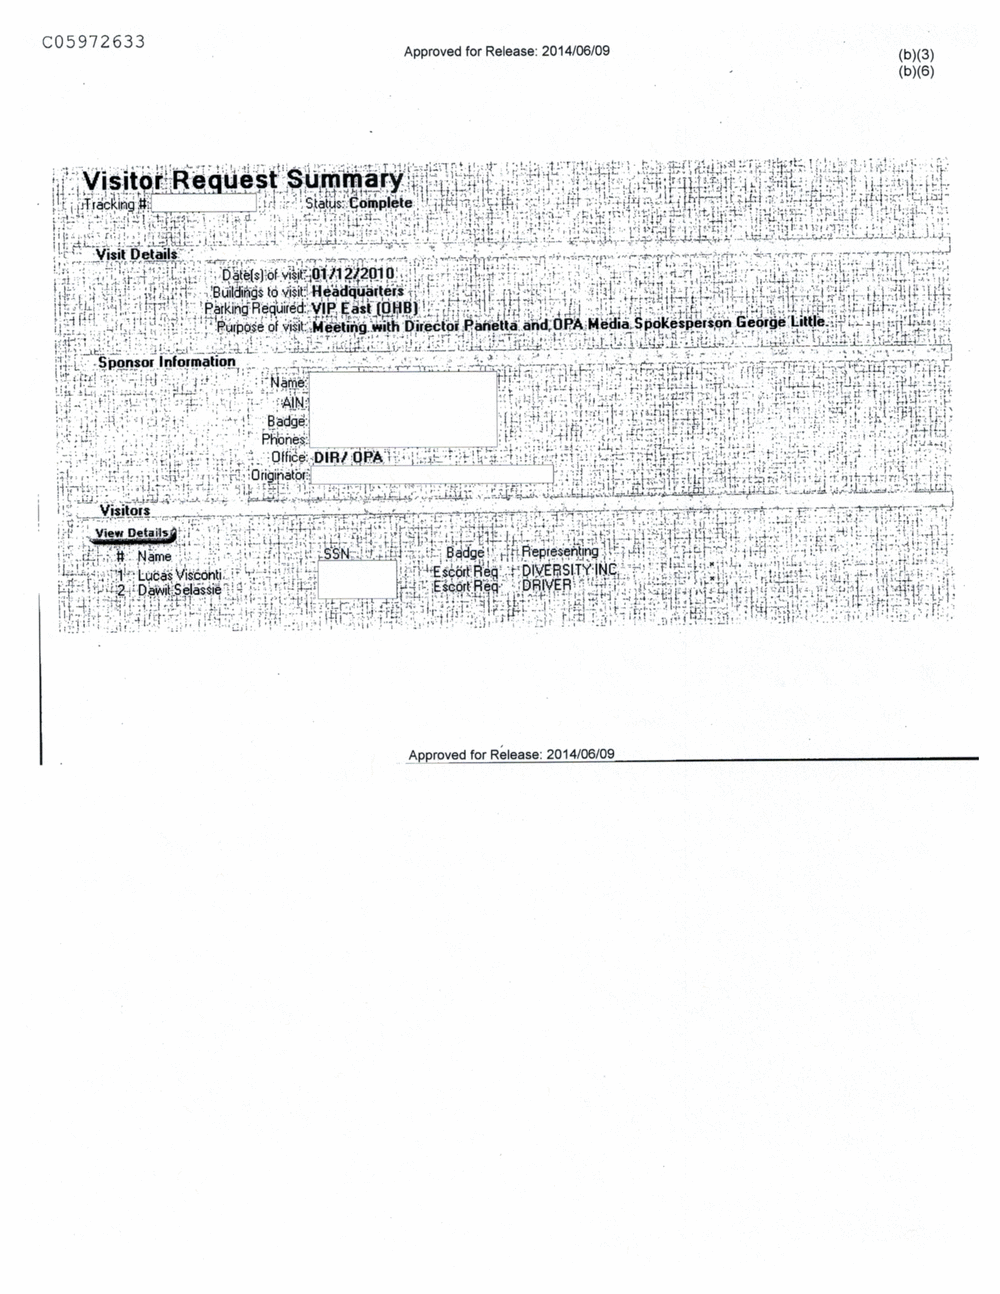 Page 571 from Email Correspondence Between Reporters and CIA Flacks